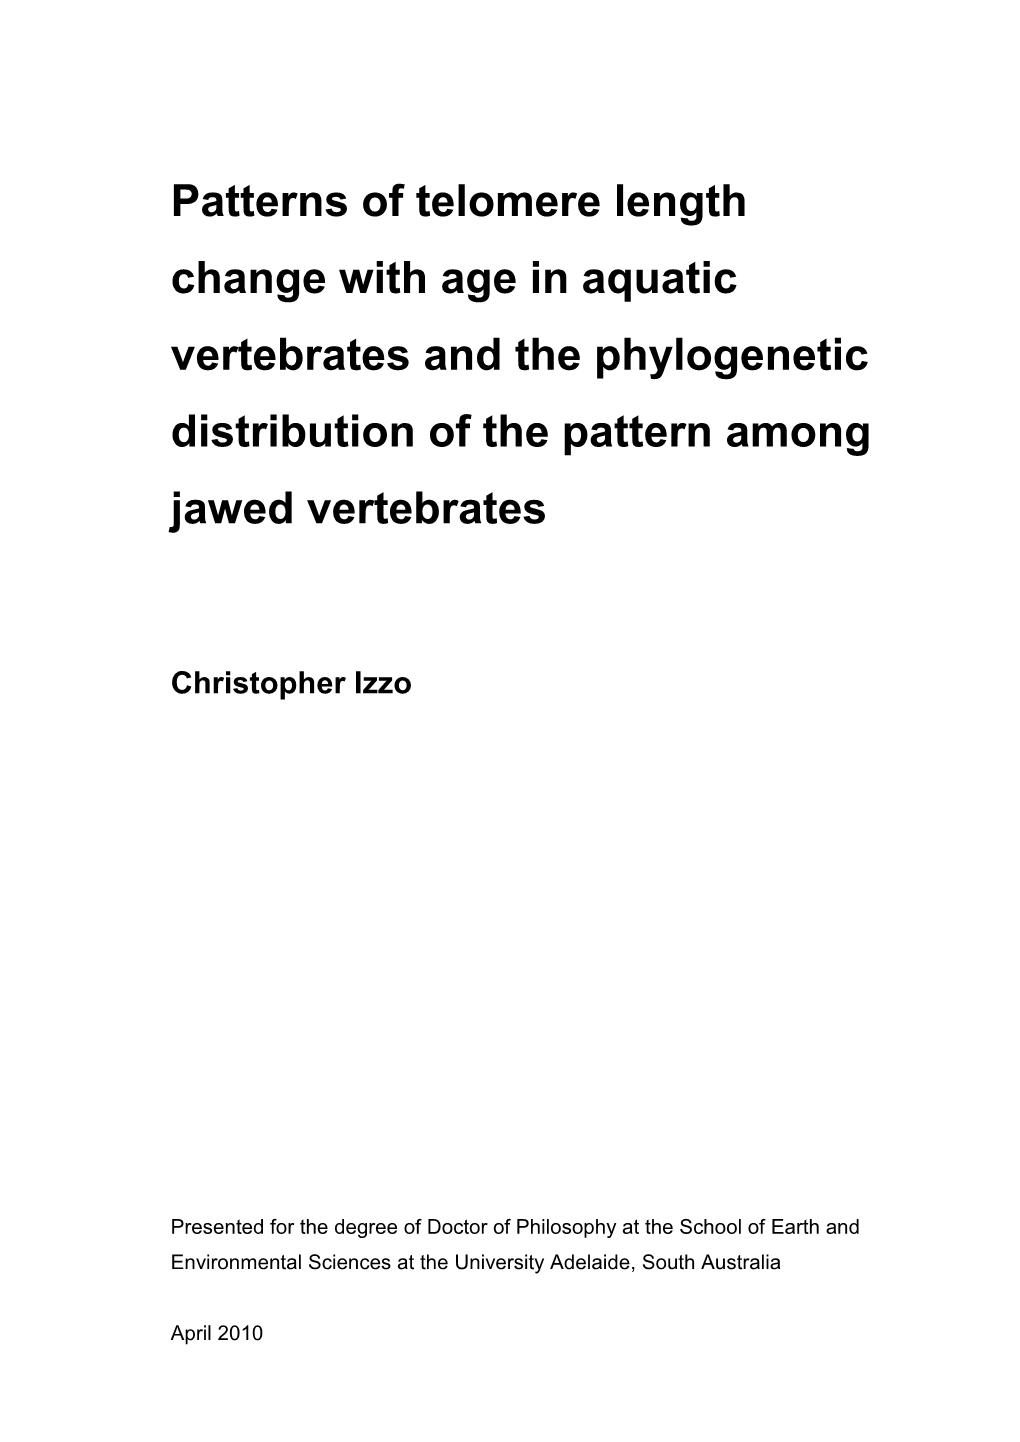 Patterns of Telomere Length Change with Age in Aquatic Vertebrates and the Phylogenetic Distribution of the Pattern Among Jawed Vertebrates